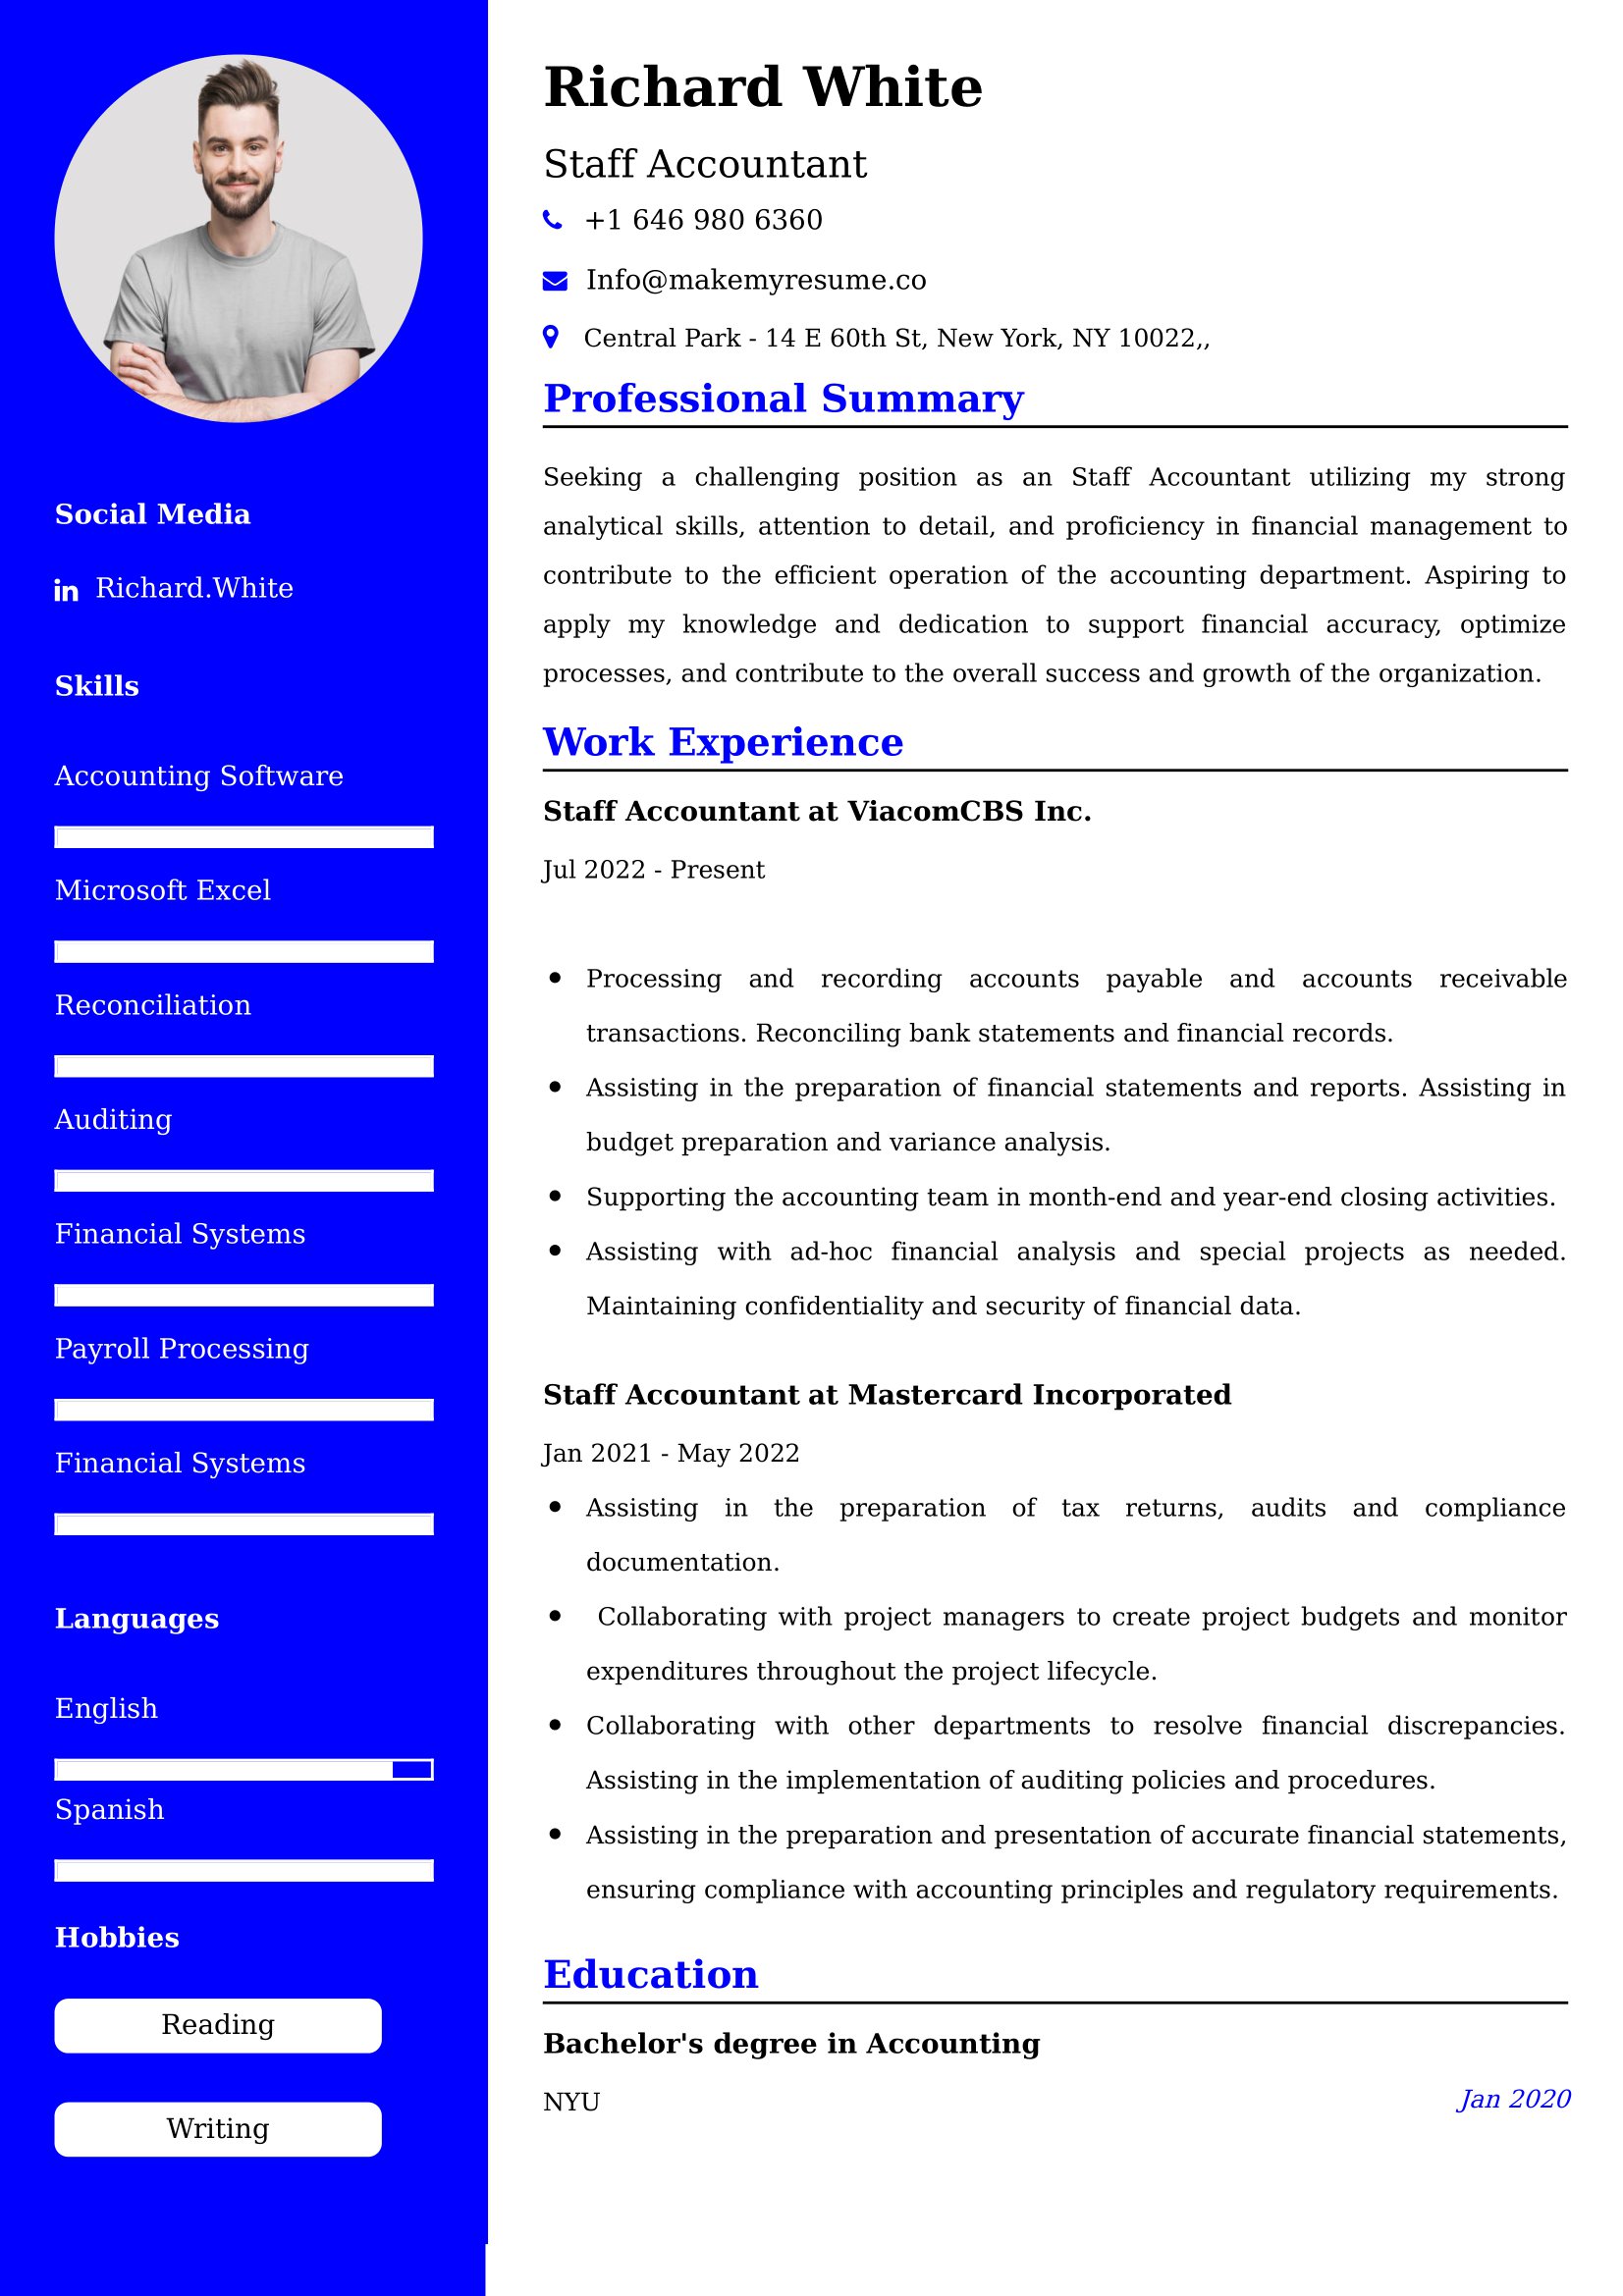 Staff Accountant Resume Examples for UAE